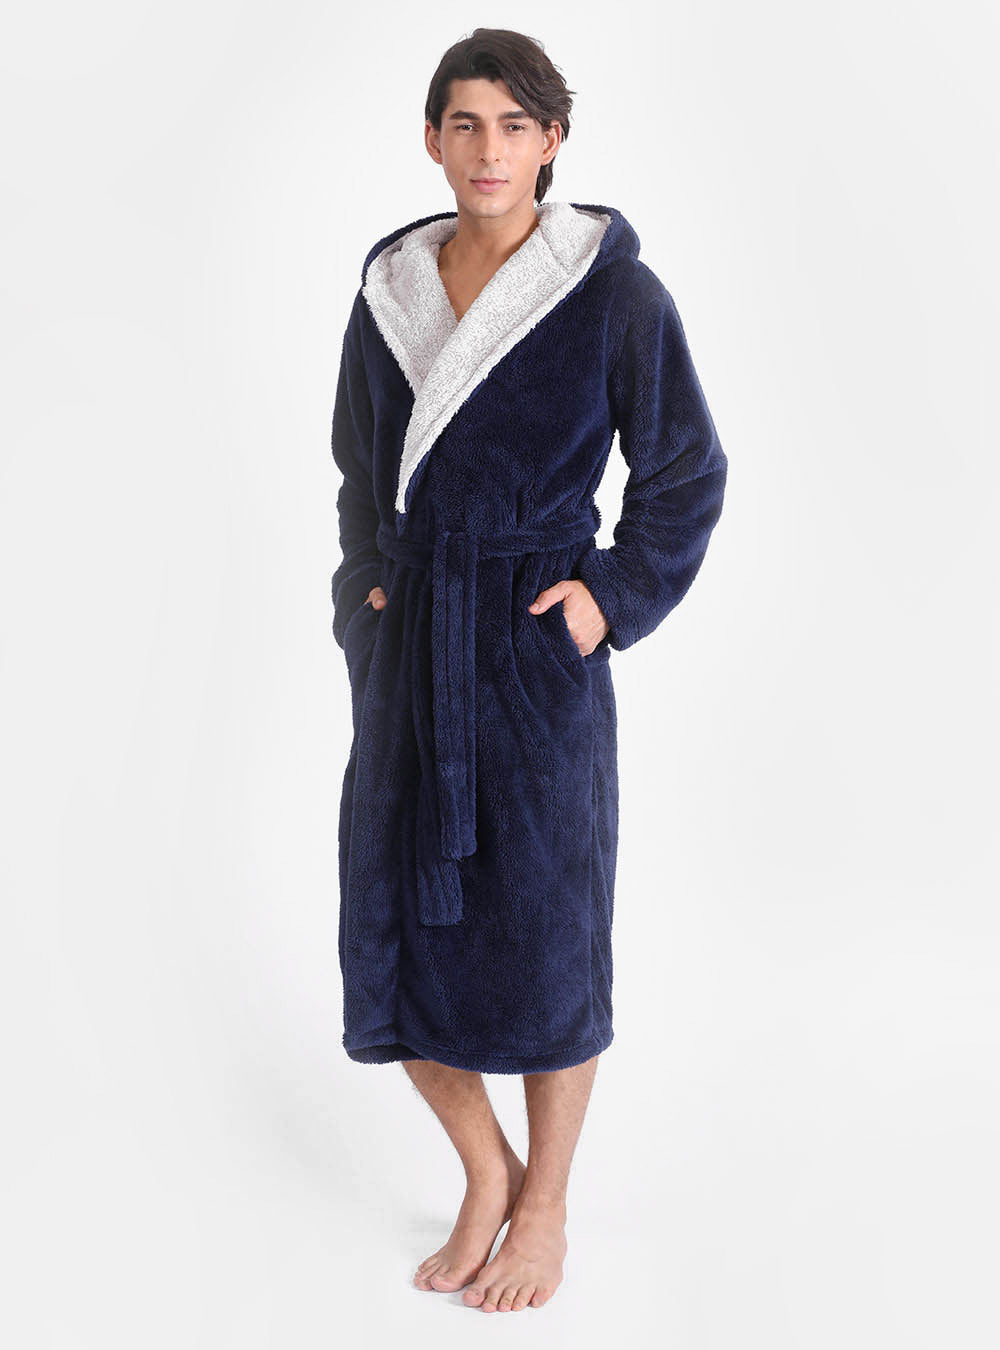 David Archy Flannel Robe With Hooded Premium Micro Fleece Full Length ...